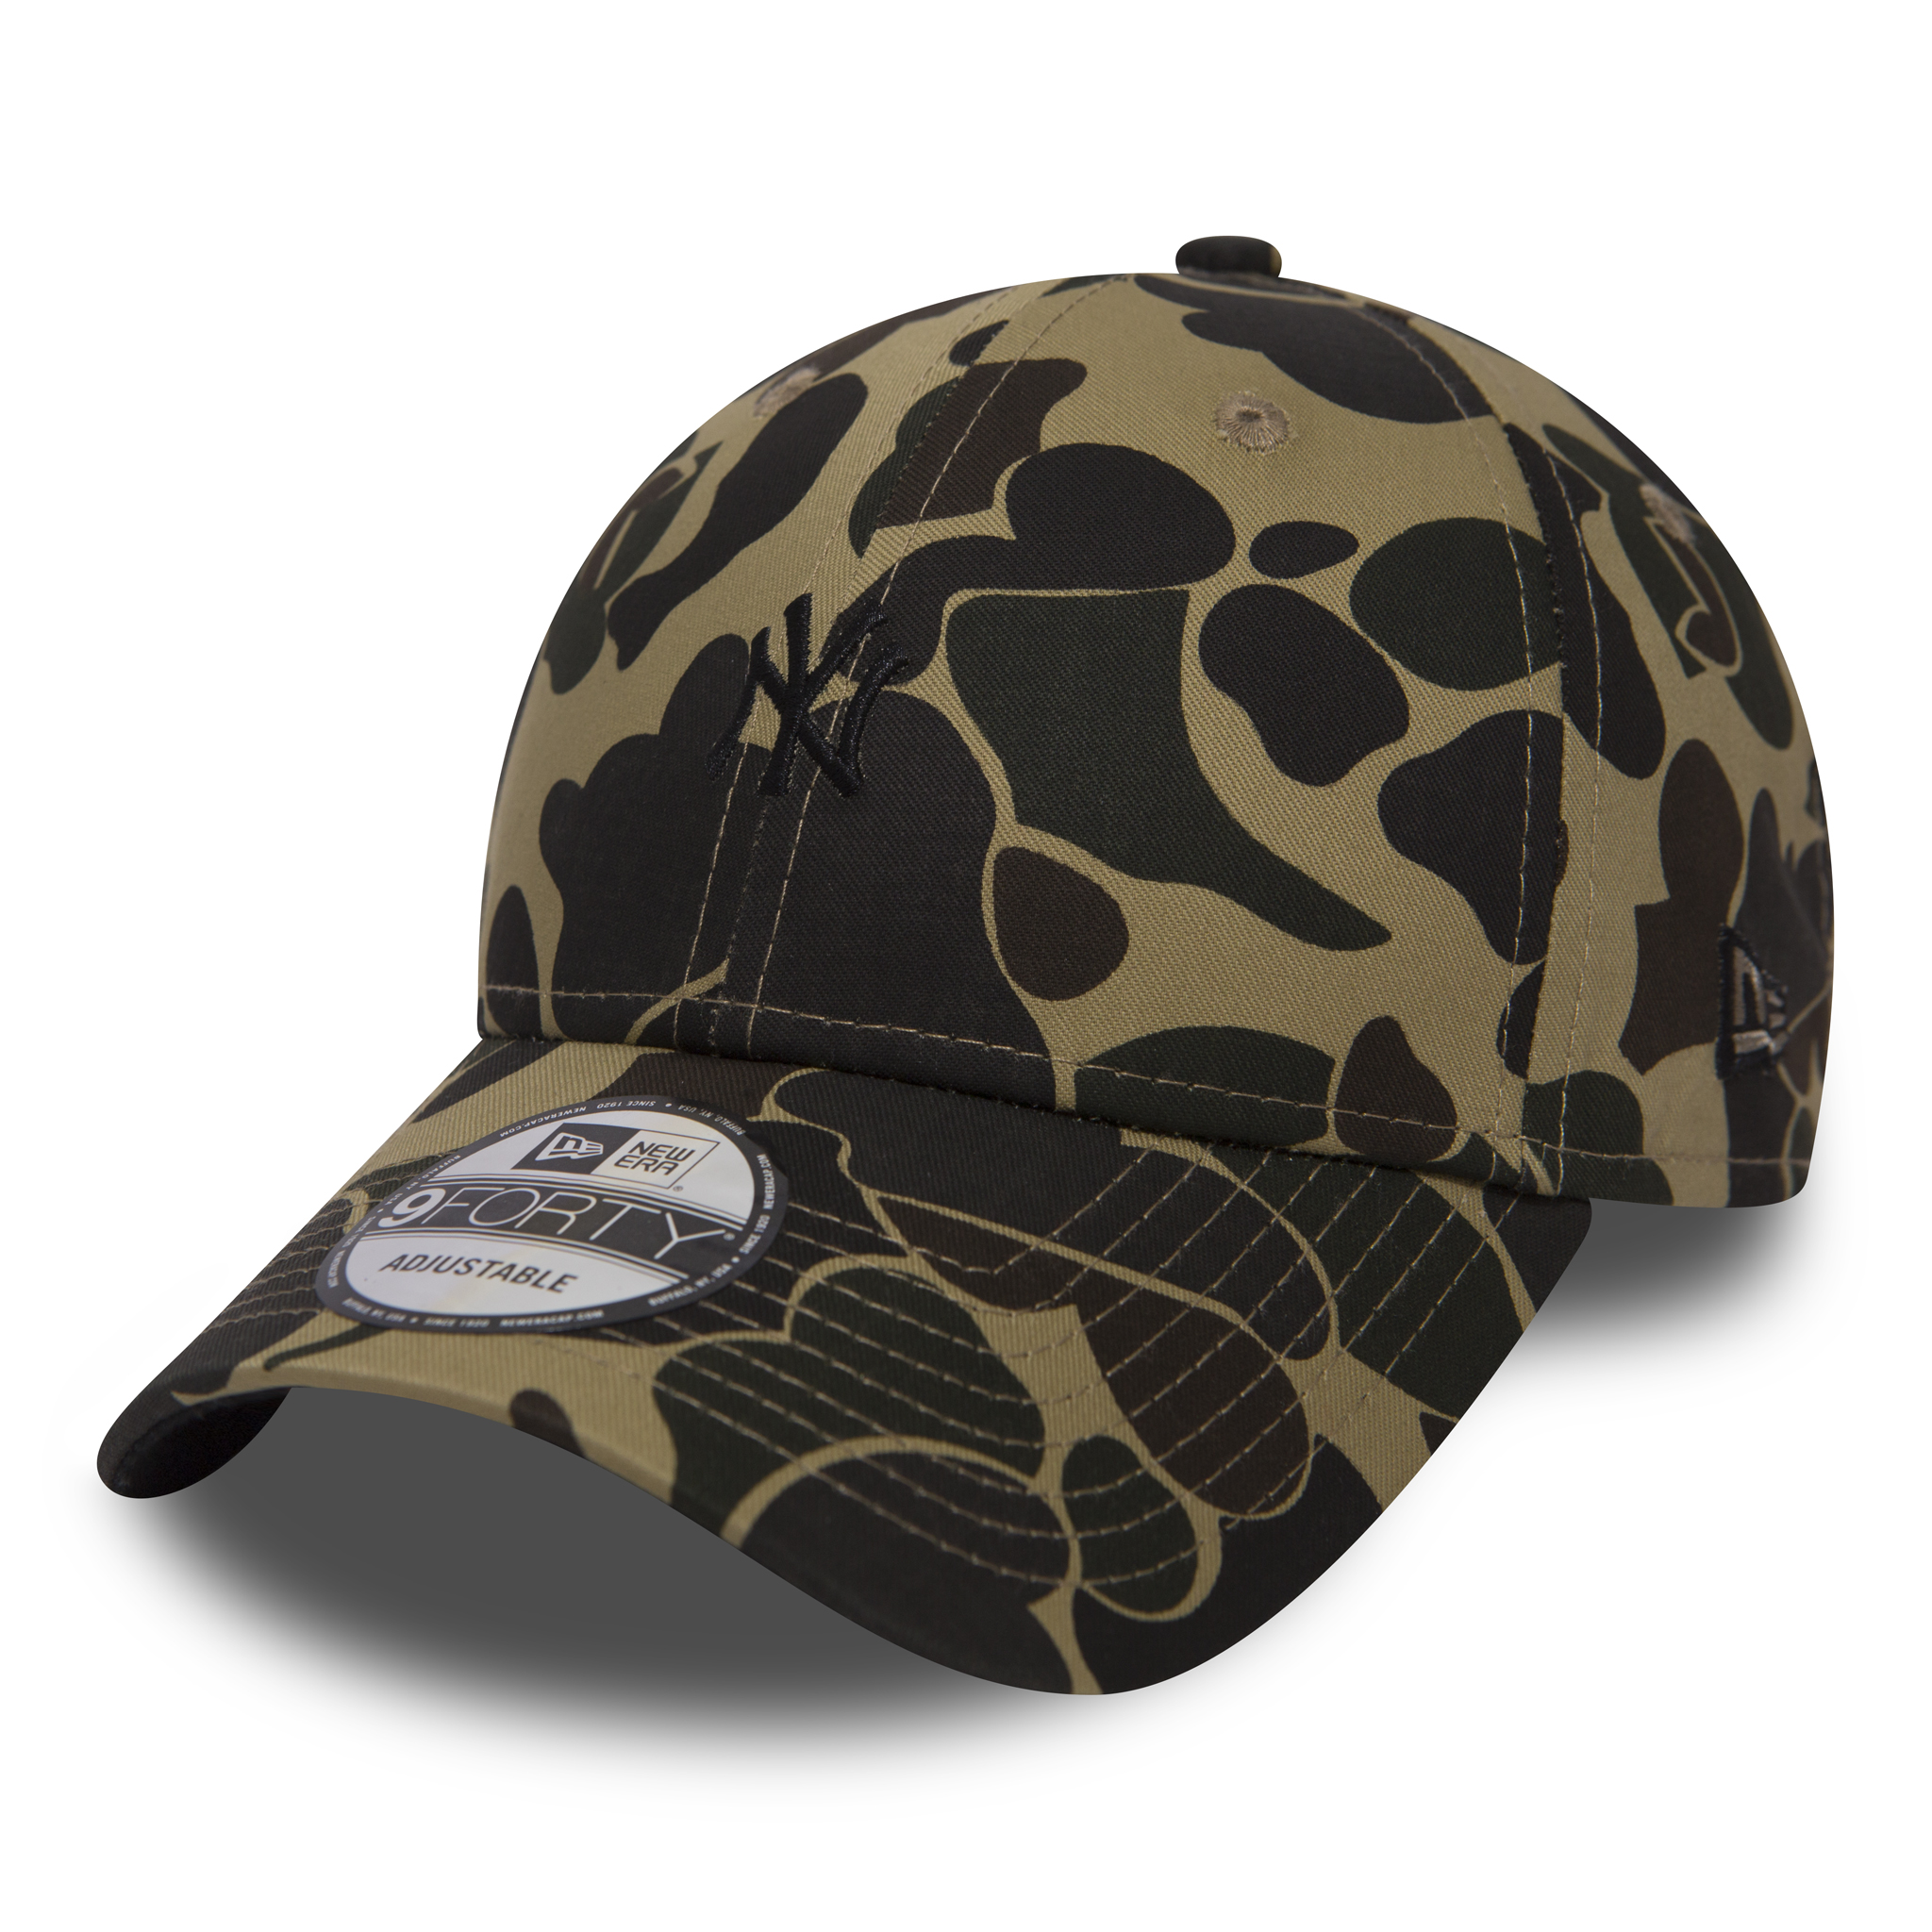 Casquette 9FORTY camouflage des Yankees de New York